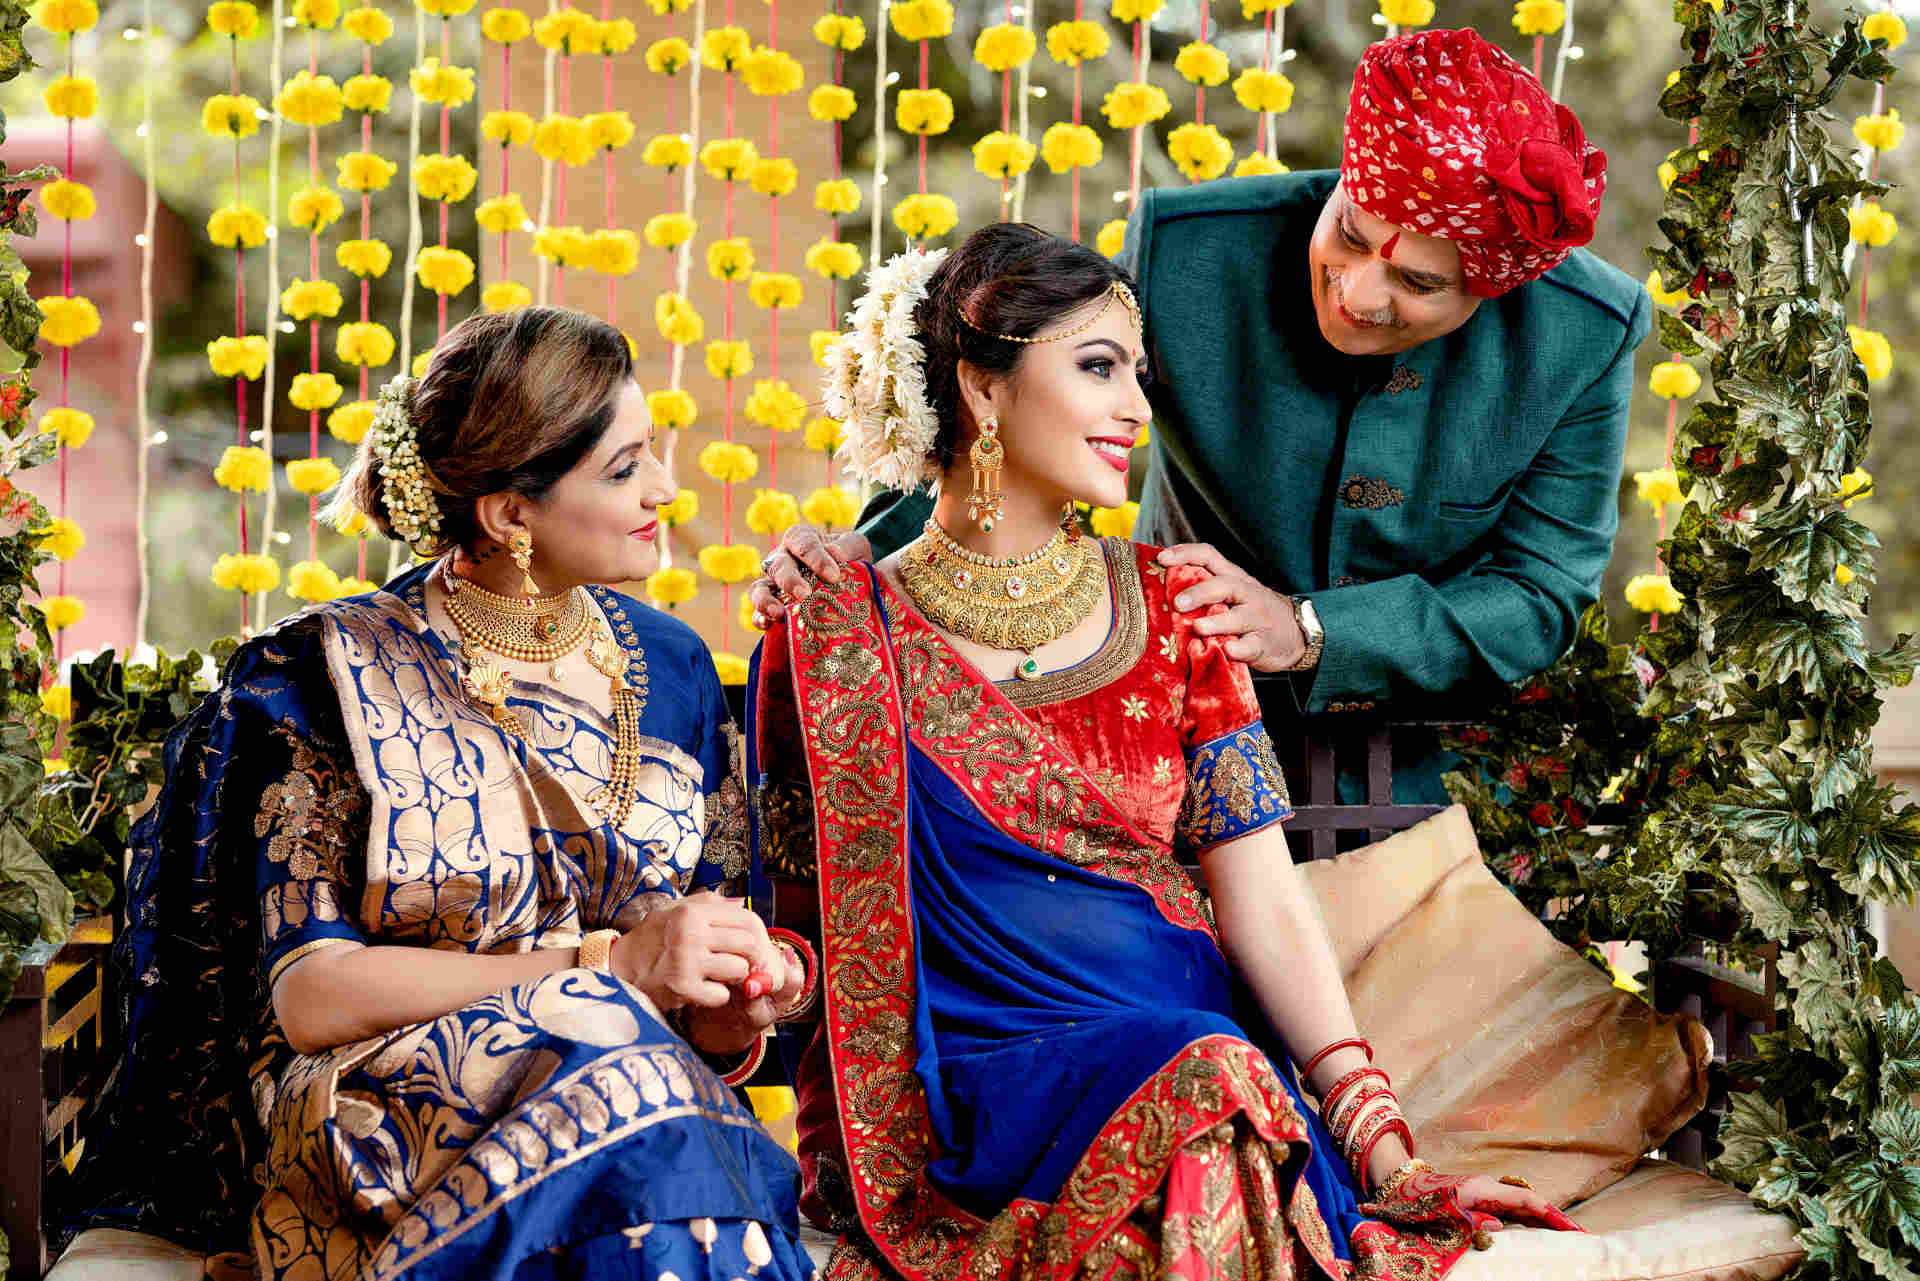 Bride with Parents Before Marriage Ceremony Wearing Bridal Jewellery